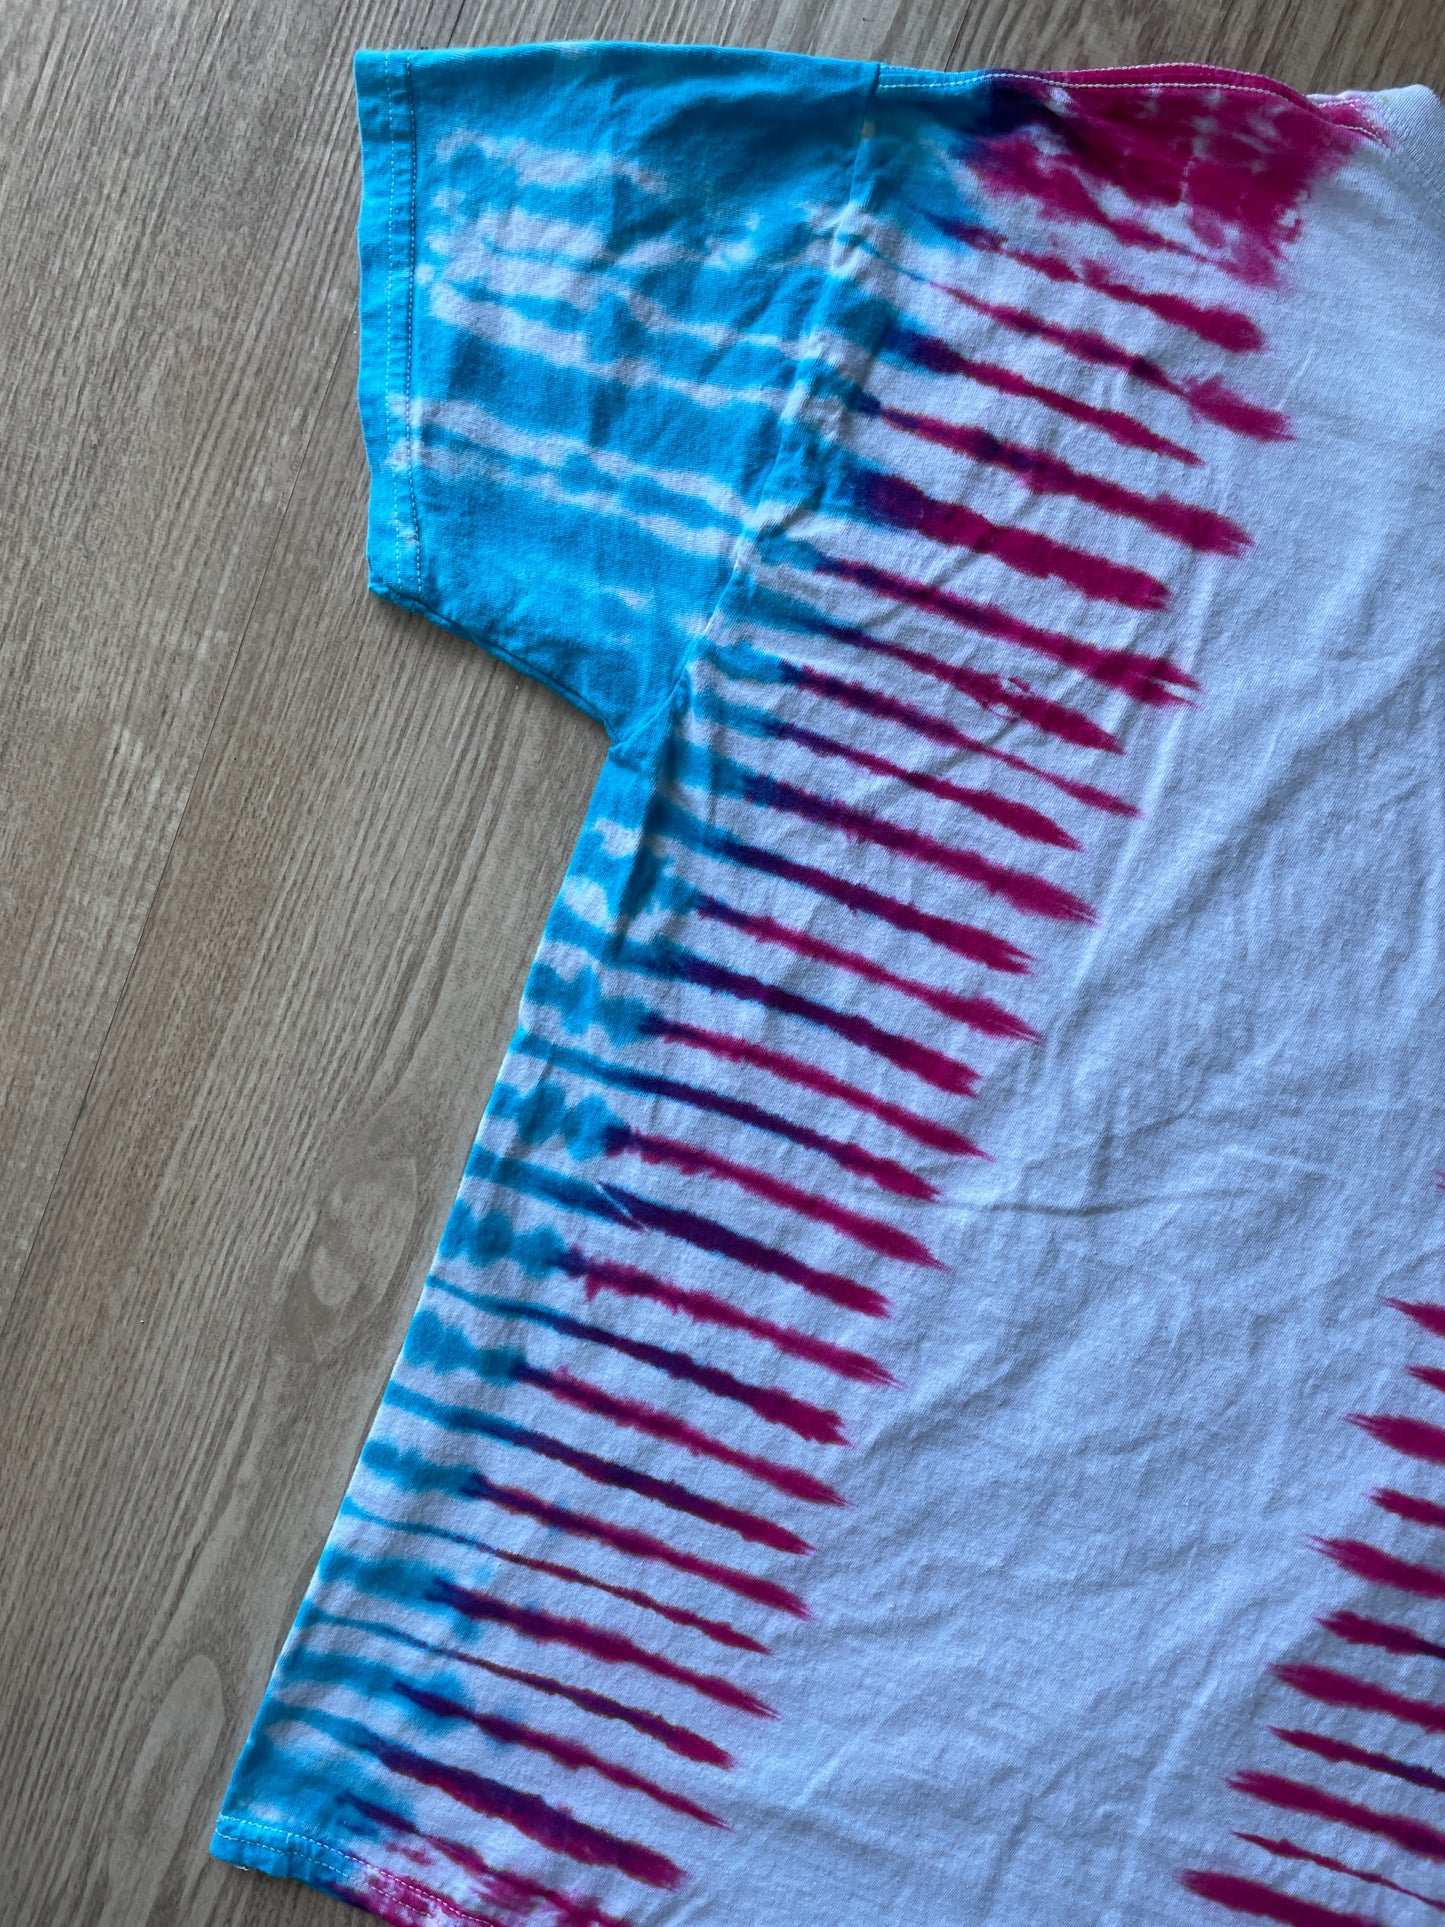 MEDIUM Men’s Trans Pride Flag-Inspired Handmade Tie Dye T-Shirt | One-Of-a-Kind Pink, Blue, and White Short Sleeve